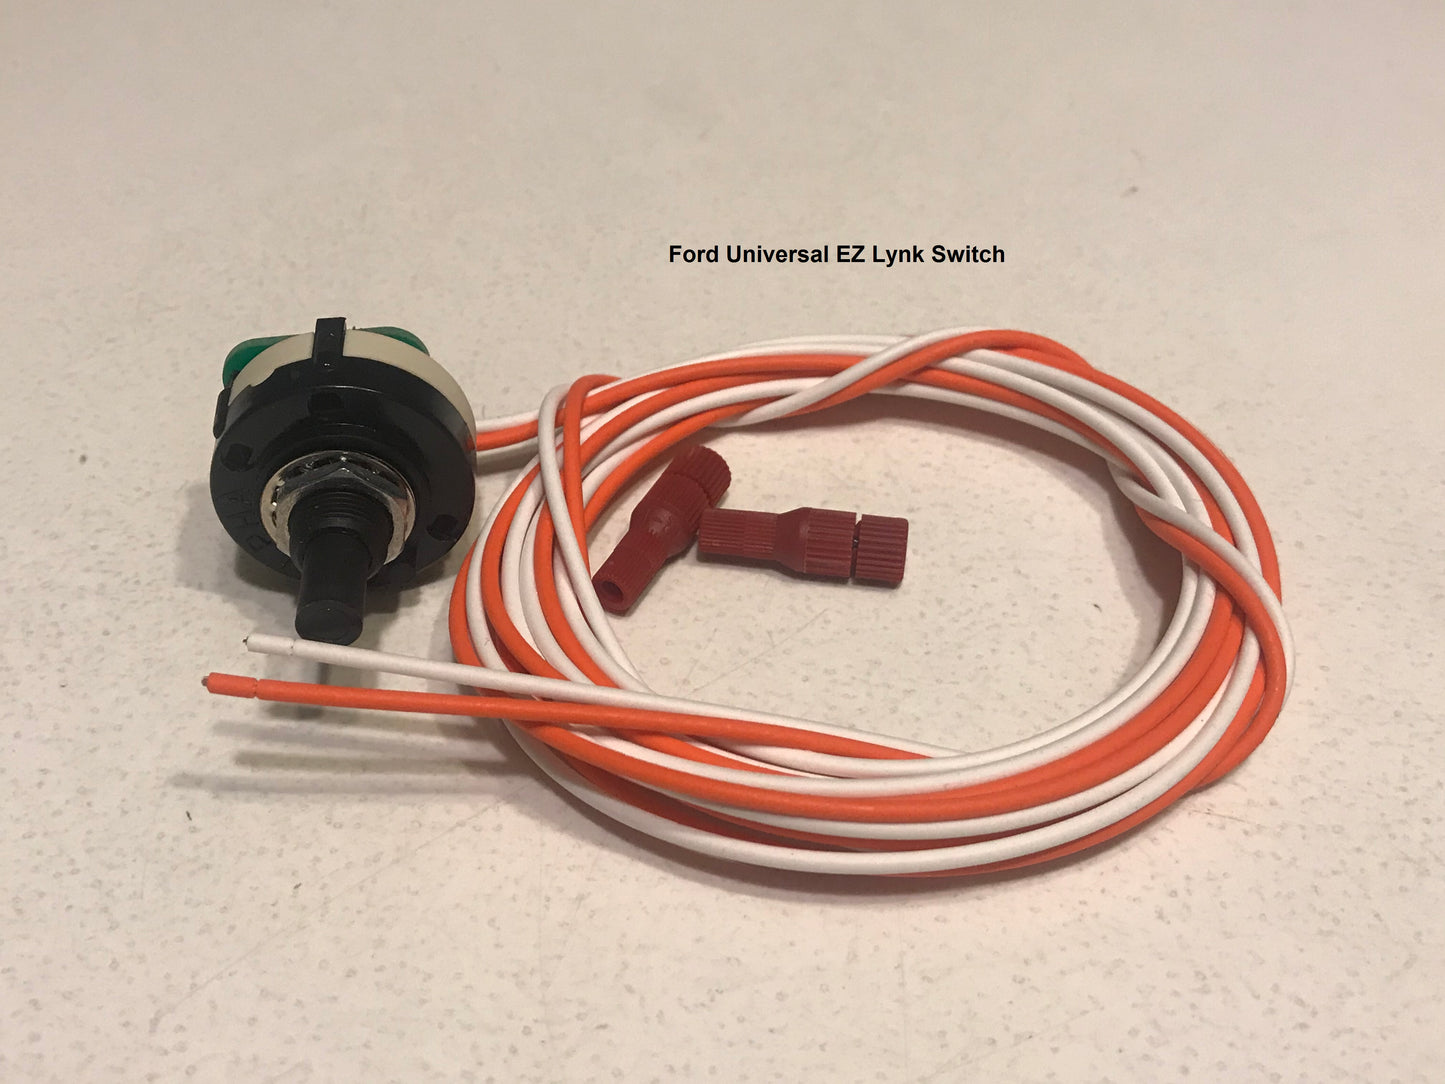 Switch and Bypass Cable Add On